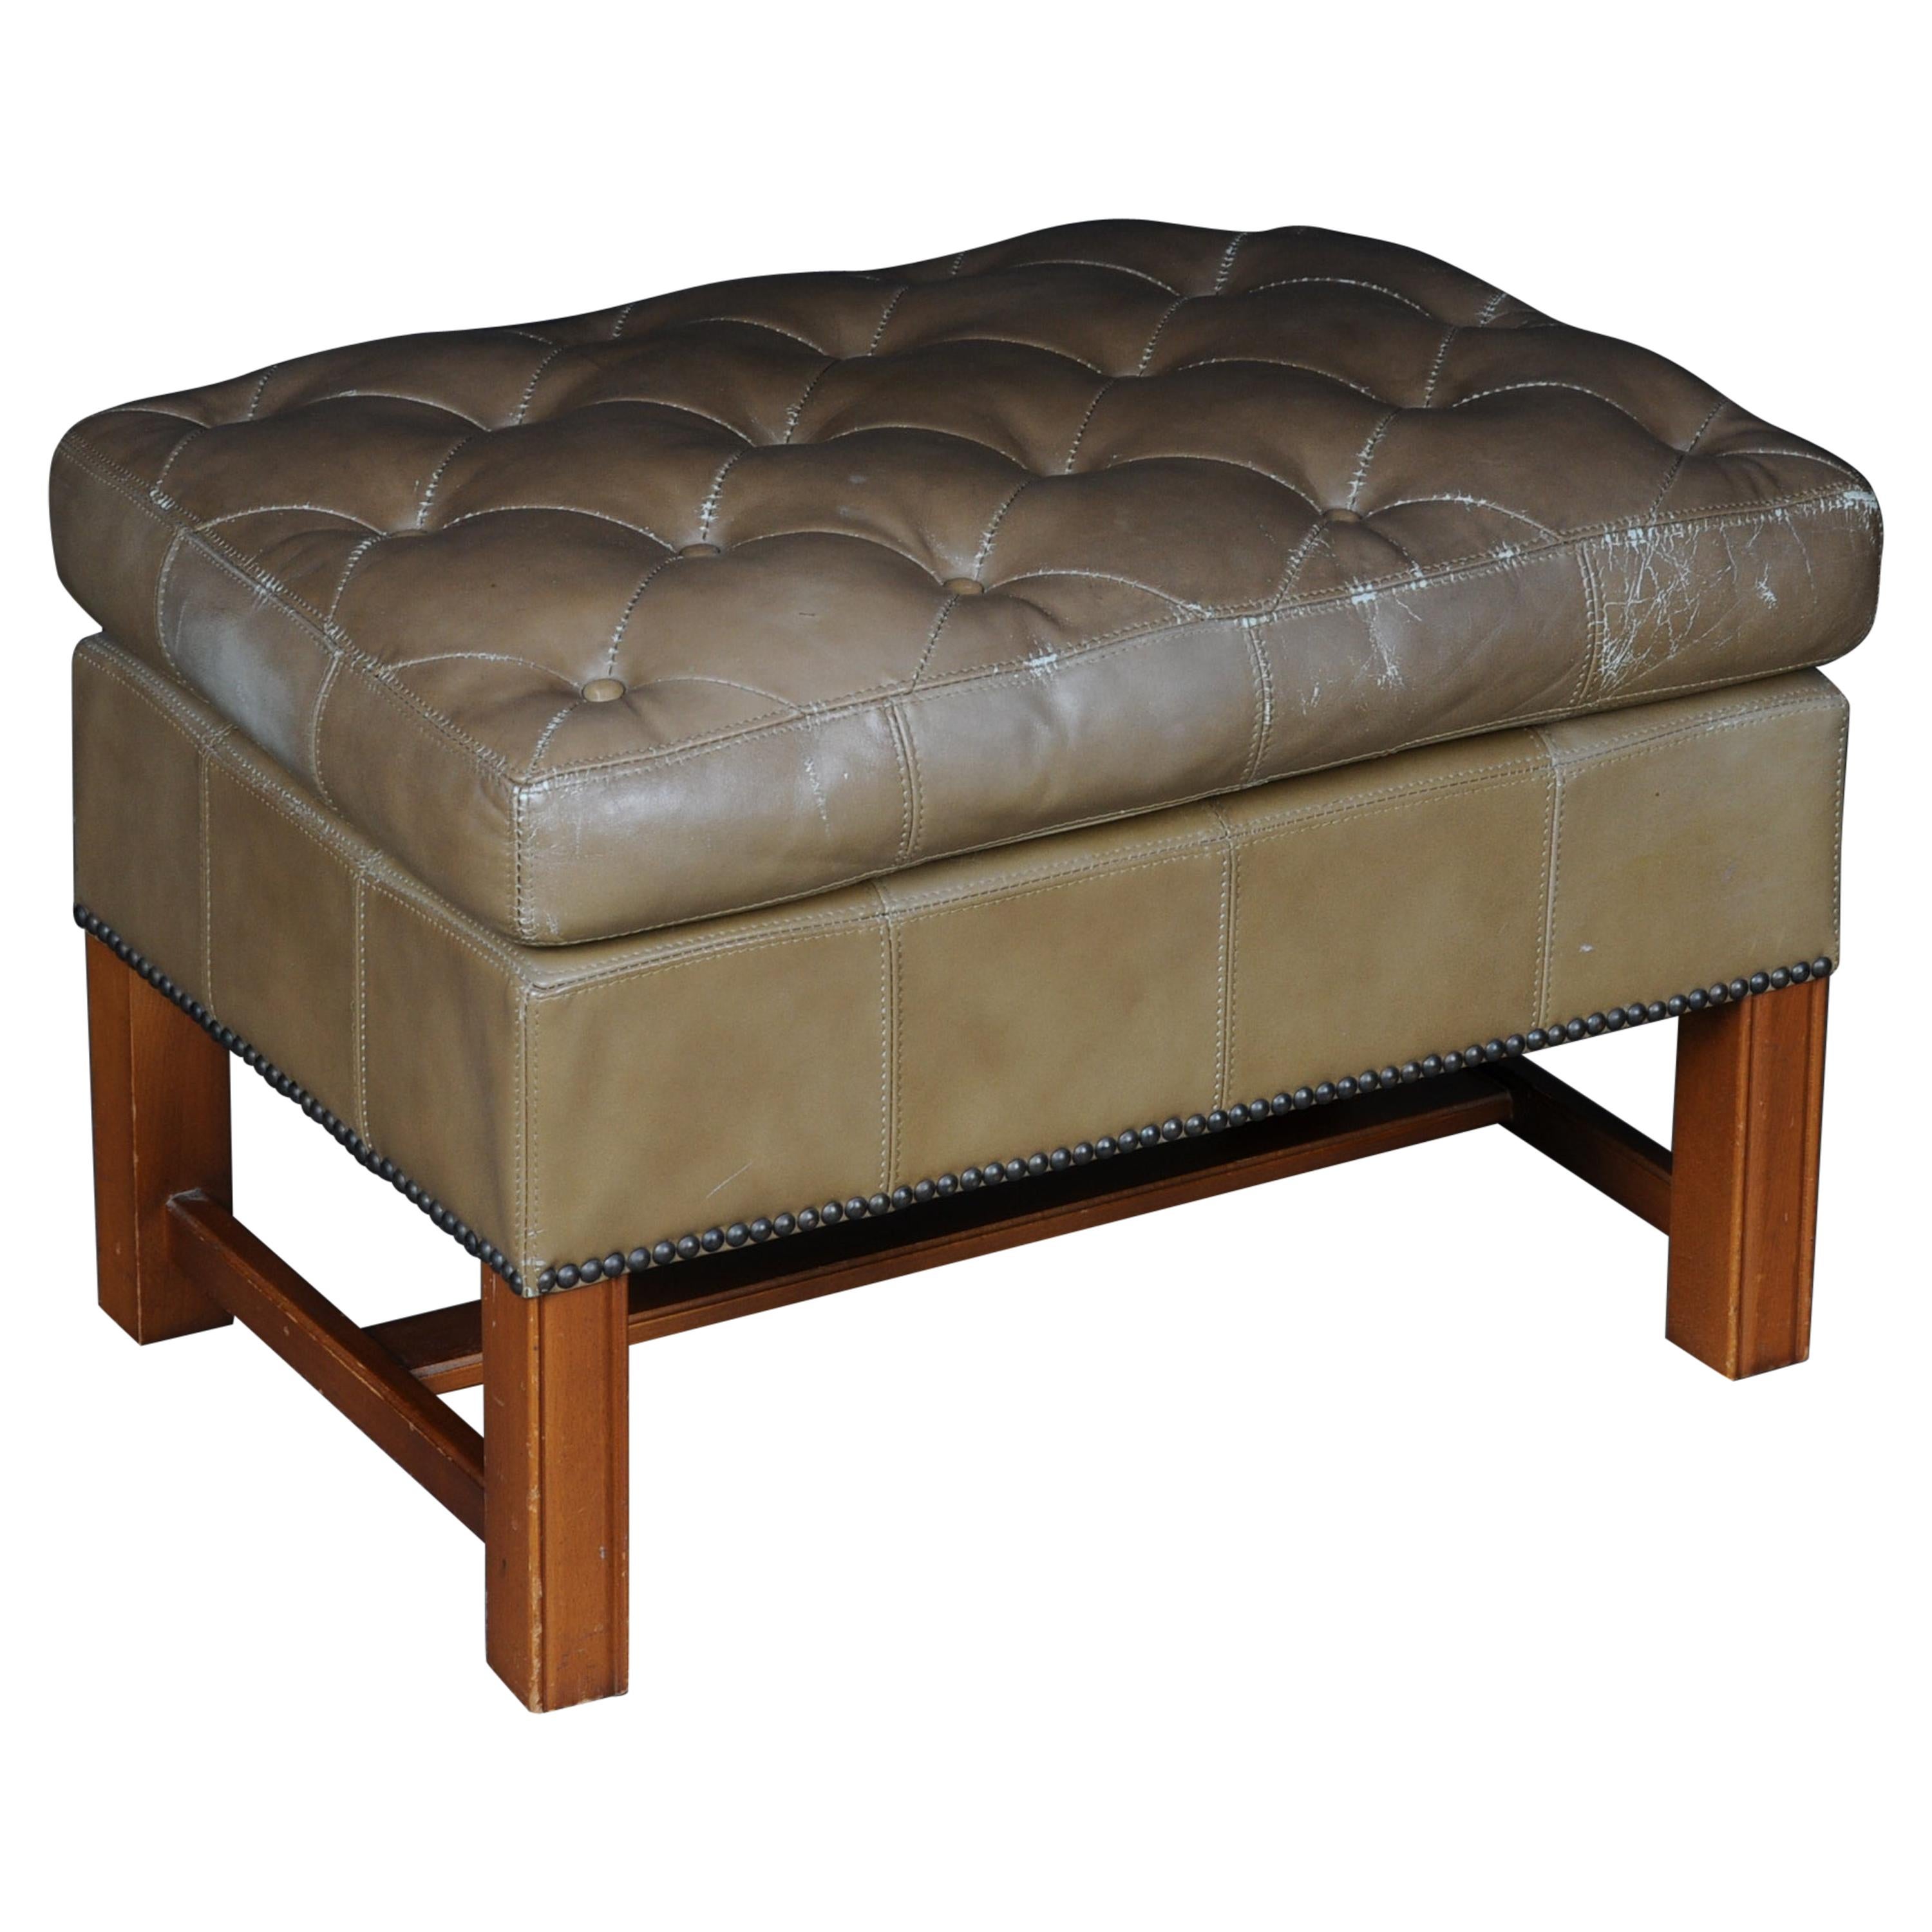 English Gray Chesterfield Stool / Bench, 20th Century